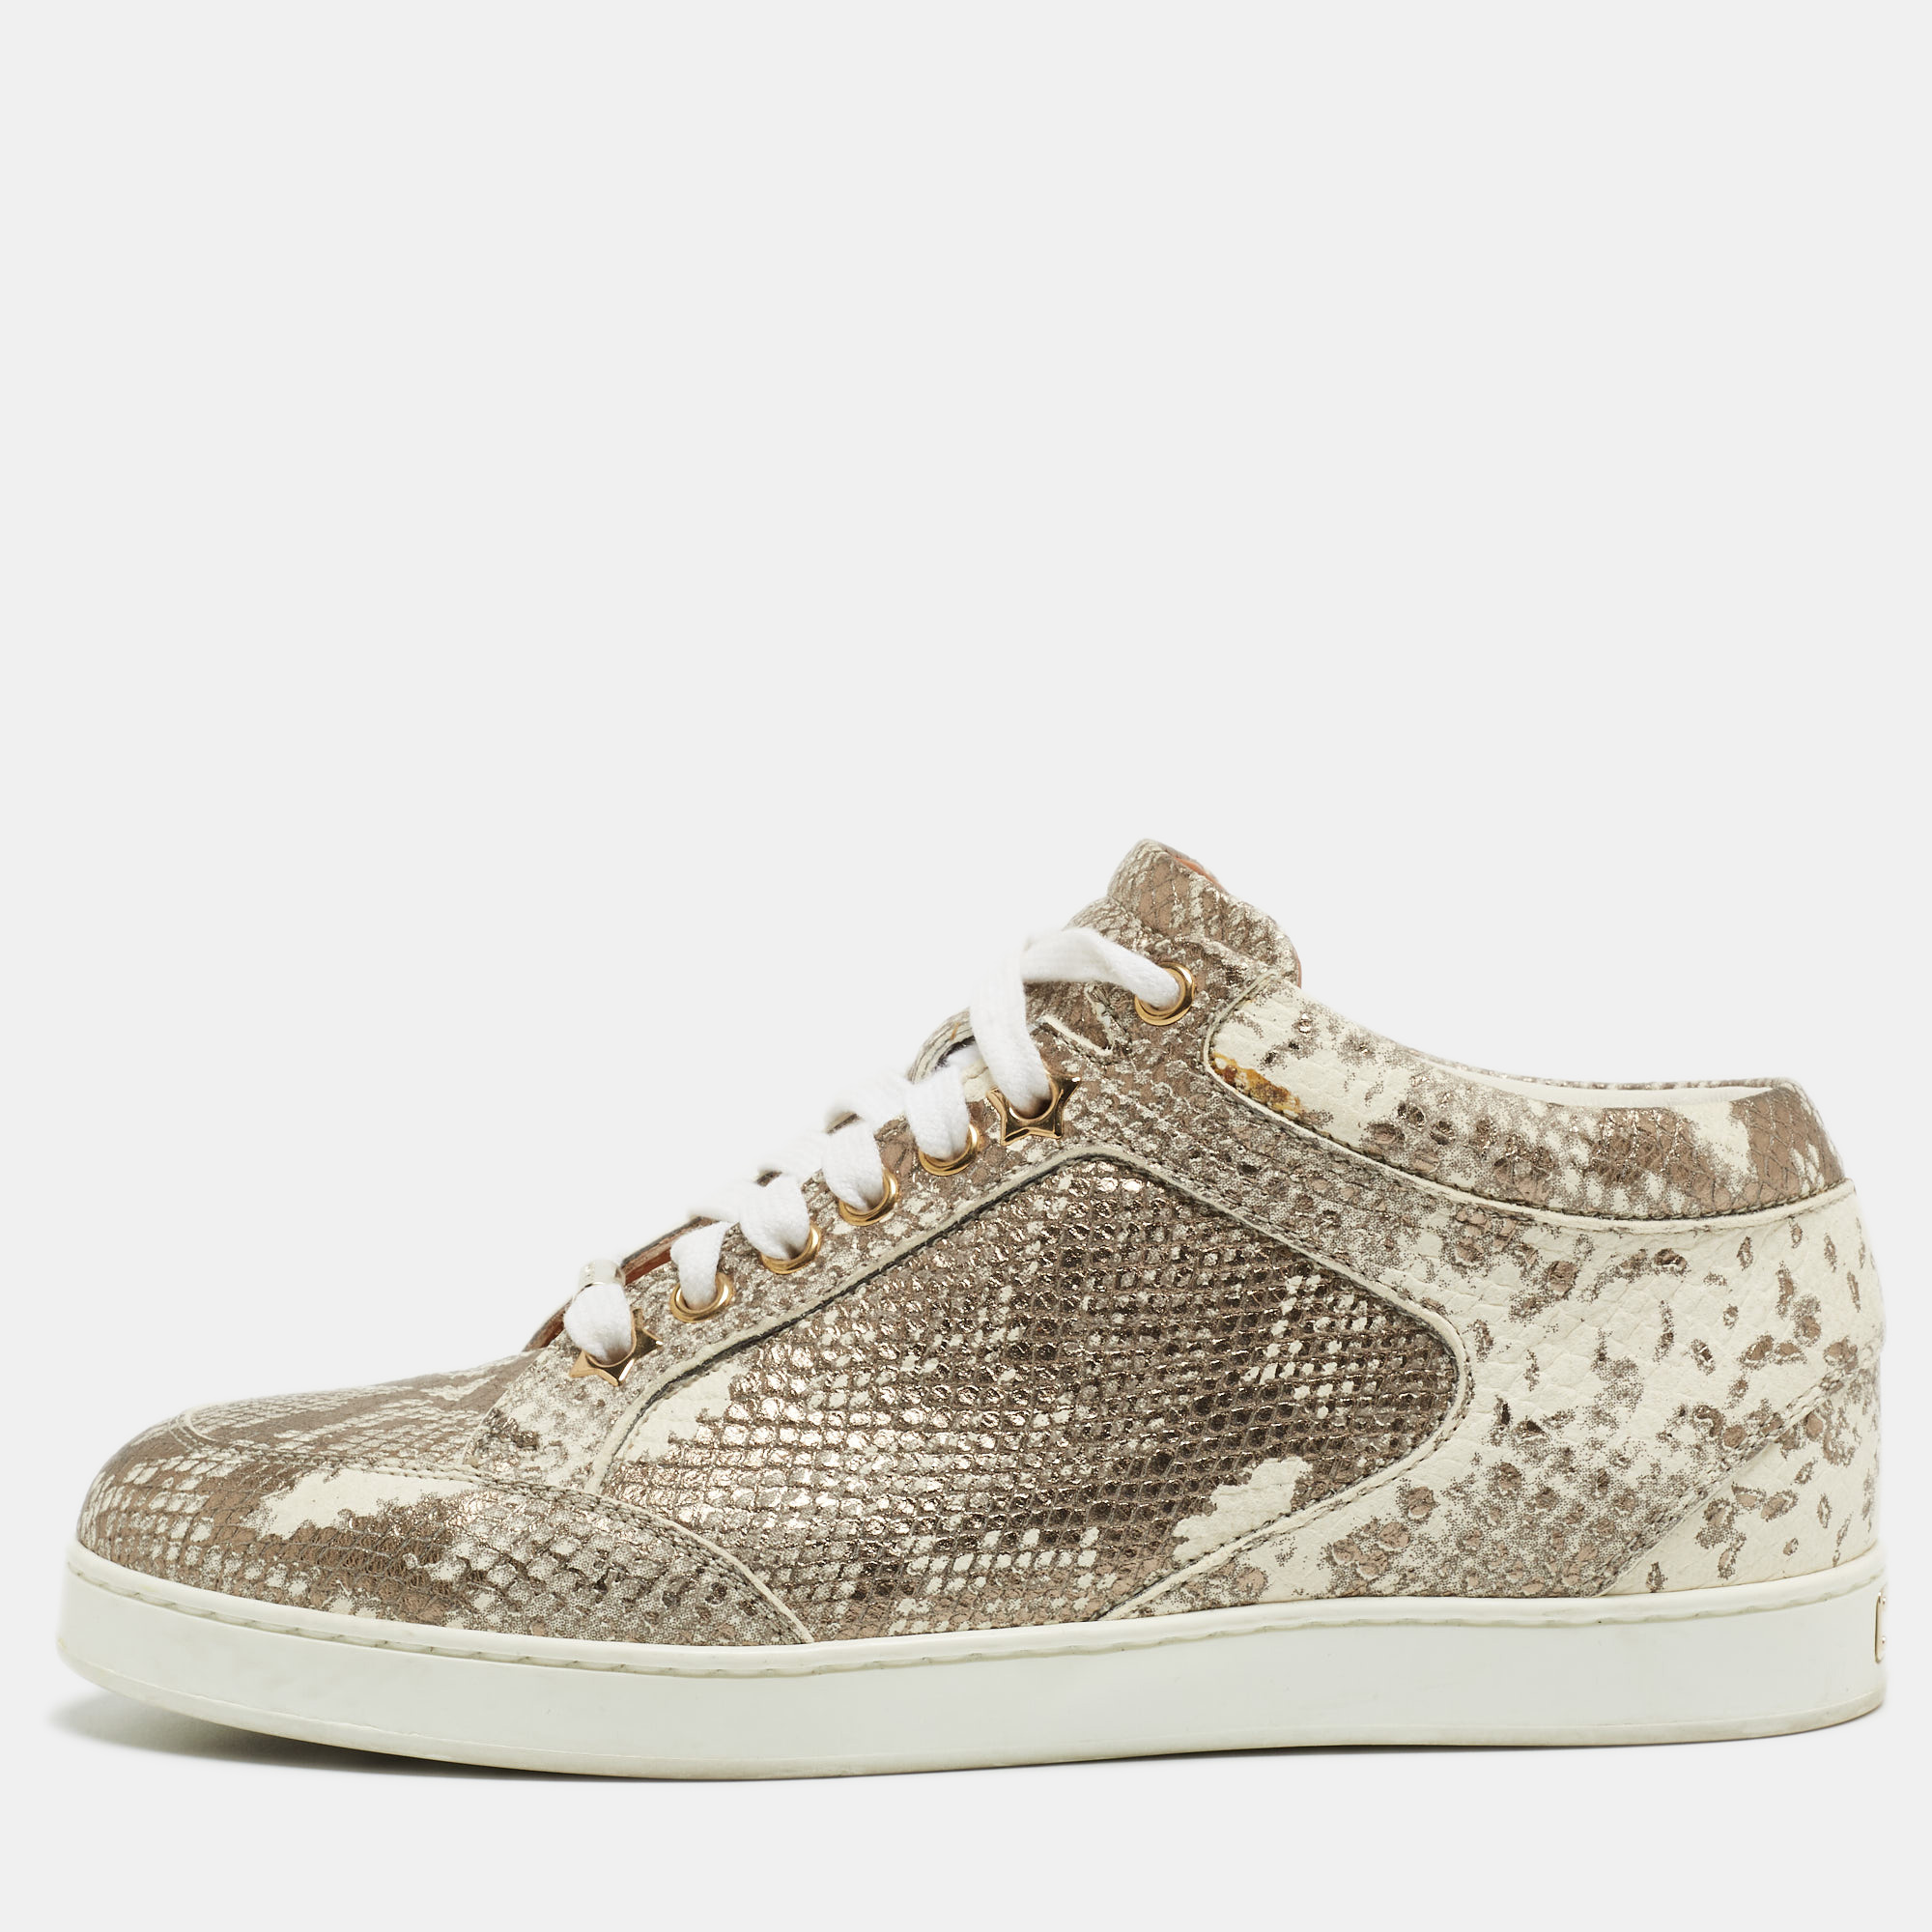 Jimmy choo metallic white python embossed leather low top sneakers size 36